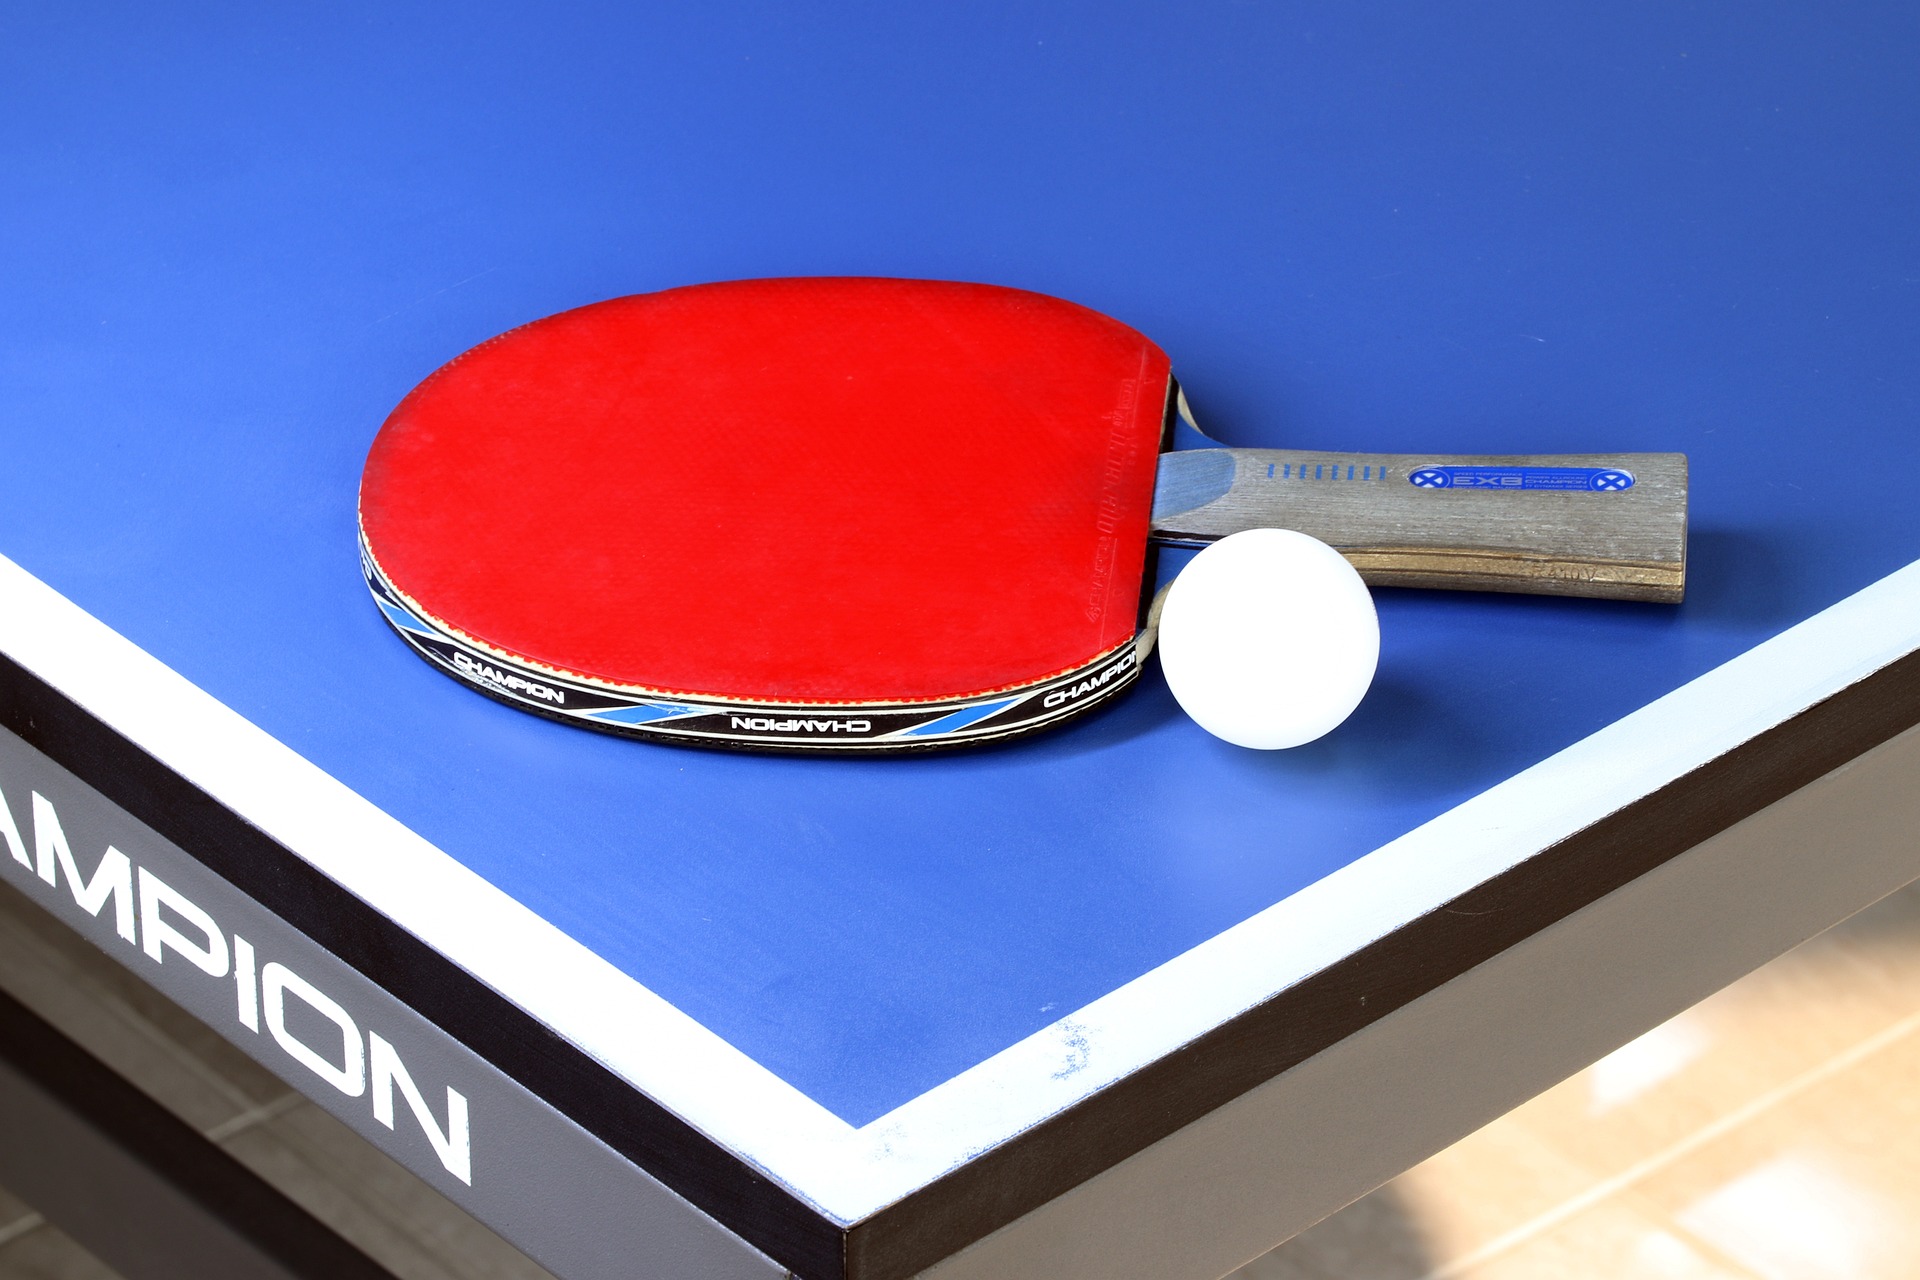 tenis stołowy ping pong - Pixabay